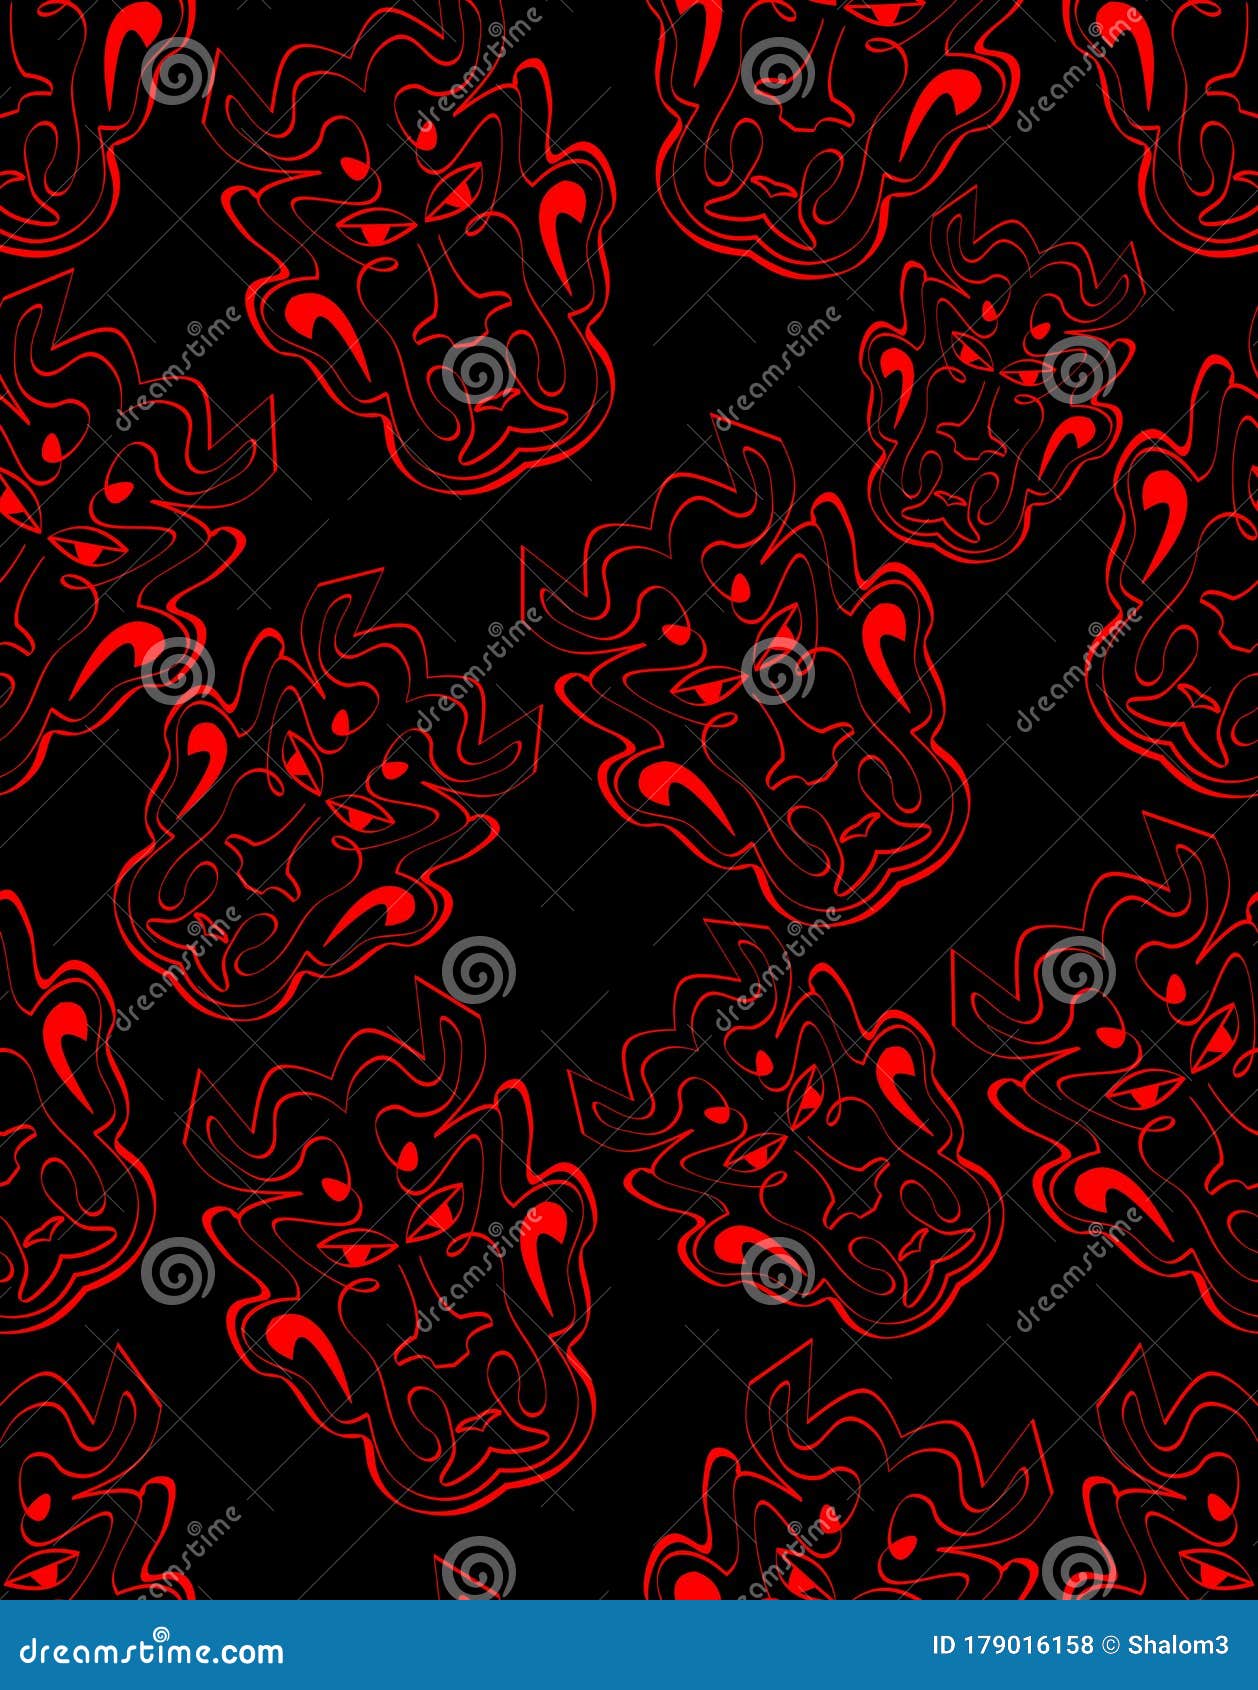 Black Background with Red Devil Heads, Seamless Patterns, Abstract ...